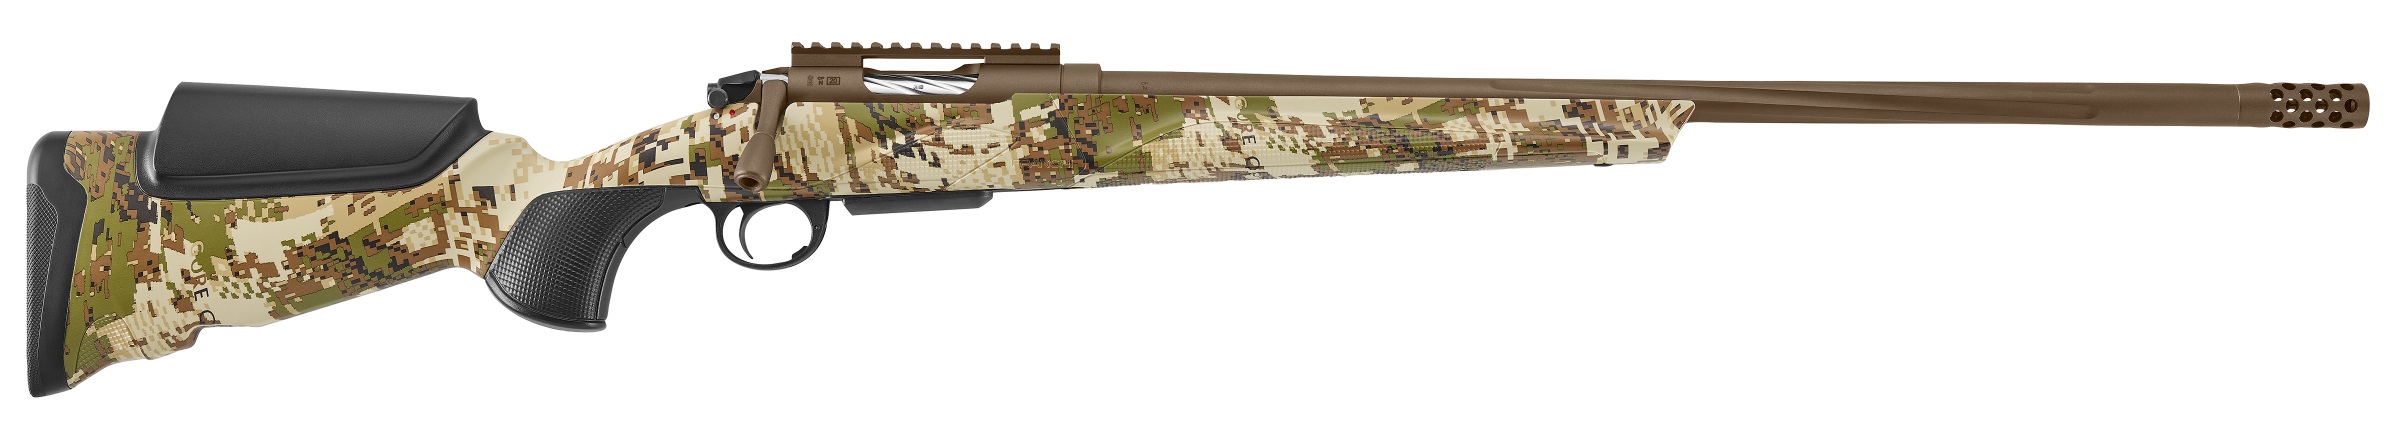 A Franchi rifle chambered for 22-250 Remington